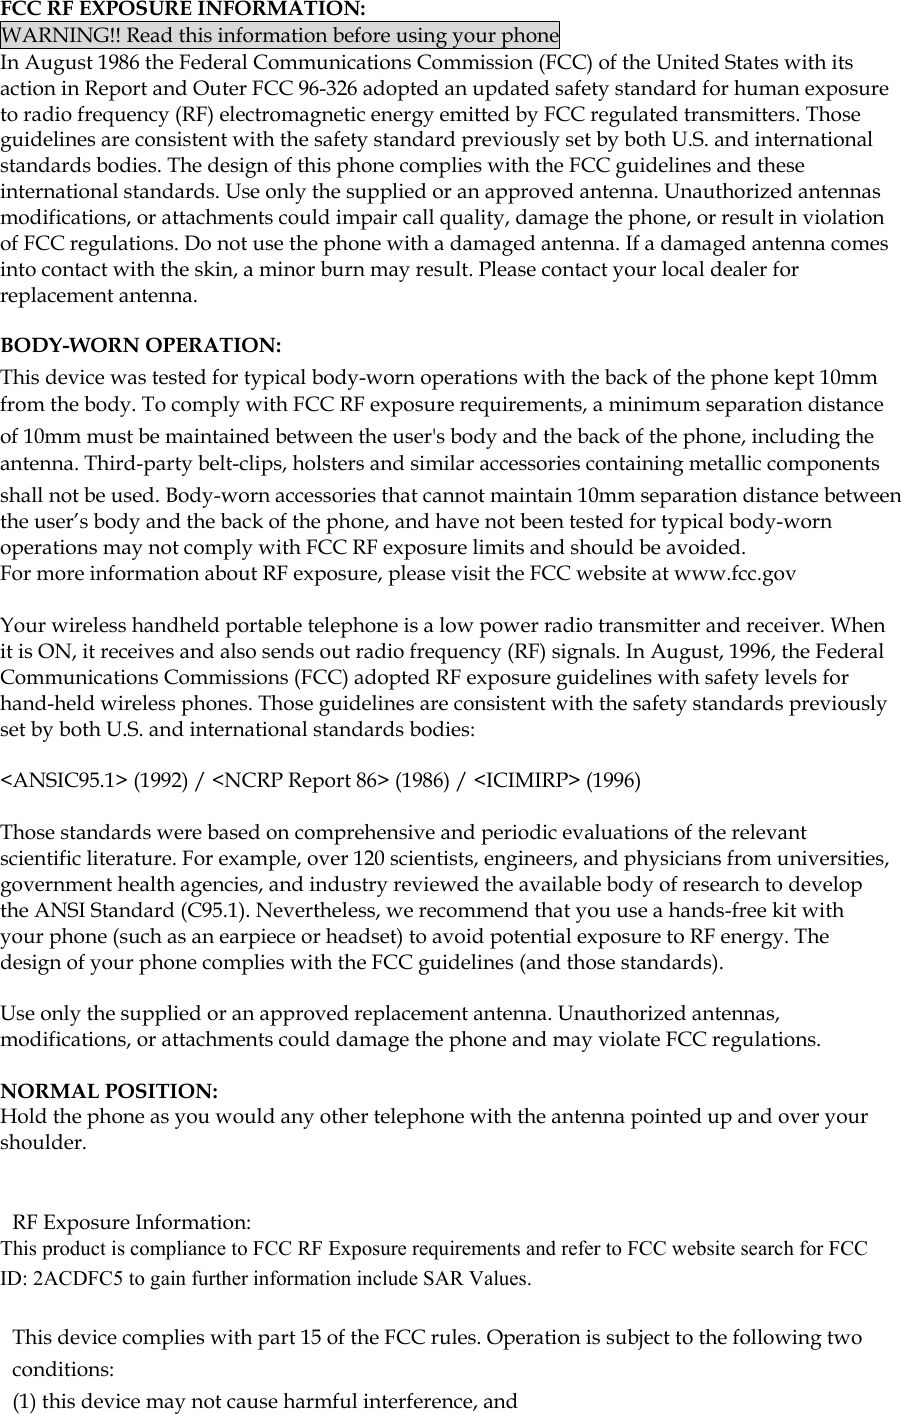  FCC RF EXPOSURE INFORMATION: WARNING!! Read this information before using your phone In August 1986 the Federal Communications Commission (FCC) of the United States with its action in Report and Outer FCC 96-326 adopted an updated safety standard for human exposure to radio frequency (RF) electromagnetic energy emitted by FCC regulated transmitters. Those guidelines are consistent with the safety standard previously set by both U.S. and international standards bodies. The design of this phone complies with the FCC guidelines and these international standards. Use only the supplied or an approved antenna. Unauthorized antennas modifications, or attachments could impair call quality, damage the phone, or result in violation of FCC regulations. Do not use the phone with a damaged antenna. If a damaged antenna comes into contact with the skin, a minor burn may result. Please contact your local dealer for replacement antenna.  BODY-WORN OPERATION: This device was tested for typical body-worn operations with the back of the phone kept 10mm from the body. To comply with FCC RF exposure requirements, a minimum separation distance of 10mm must be maintained between the user&apos;s body and the back of the phone, including the antenna. Third-party belt-clips, holsters and similar accessories containing metallic components shall not be used. Body-worn accessories that cannot maintain 10mm separation distance between the user’s body and the back of the phone, and have not been tested for typical body-worn operations may not comply with FCC RF exposure limits and should be avoided. For more information about RF exposure, please visit the FCC website at www.fcc.gov  Your wireless handheld portable telephone is a low power radio transmitter and receiver. When it is ON, it receives and also sends out radio frequency (RF) signals. In August, 1996, the Federal Communications Commissions (FCC) adopted RF exposure guidelines with safety levels for hand-held wireless phones. Those guidelines are consistent with the safety standards previously set by both U.S. and international standards bodies:  &lt;ANSIC95.1&gt; (1992) / &lt;NCRP Report 86&gt; (1986) / &lt;ICIMIRP&gt; (1996)  Those standards were based on comprehensive and periodic evaluations of the relevant scientific literature. For example, over 120 scientists, engineers, and physicians from universities, government health agencies, and industry reviewed the available body of research to develop the ANSI Standard (C95.1). Nevertheless, we recommend that you use a hands-free kit with your phone (such as an earpiece or headset) to avoid potential exposure to RF energy. The design of your phone complies with the FCC guidelines (and those standards).  Use only the supplied or an approved replacement antenna. Unauthorized antennas, modifications, or attachments could damage the phone and may violate FCC regulations.   NORMAL POSITION:  Hold the phone as you would any other telephone with the antenna pointed up and over your shoulder.   RF Exposure Information: This product is compliance to FCC RF Exposure requirements and refer to FCC website search for FCC ID: 2ACDFC5 to gain further information include SAR Values.    This device complies with part 15 of the FCC rules. Operation is subject to the following two conditions: (1) this device may not cause harmful interference, and 